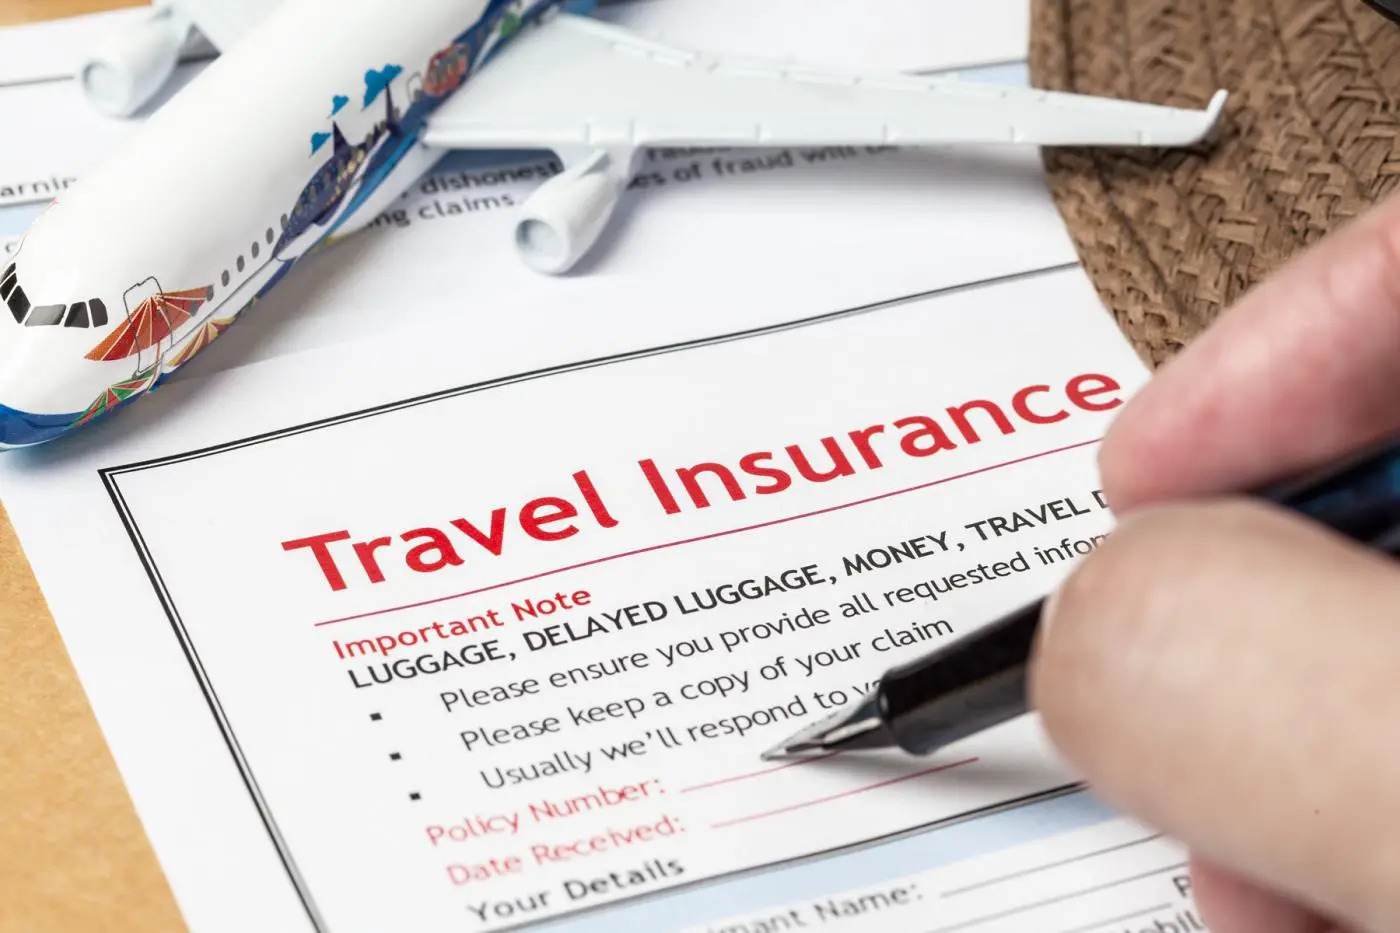 How to get travel insurance?